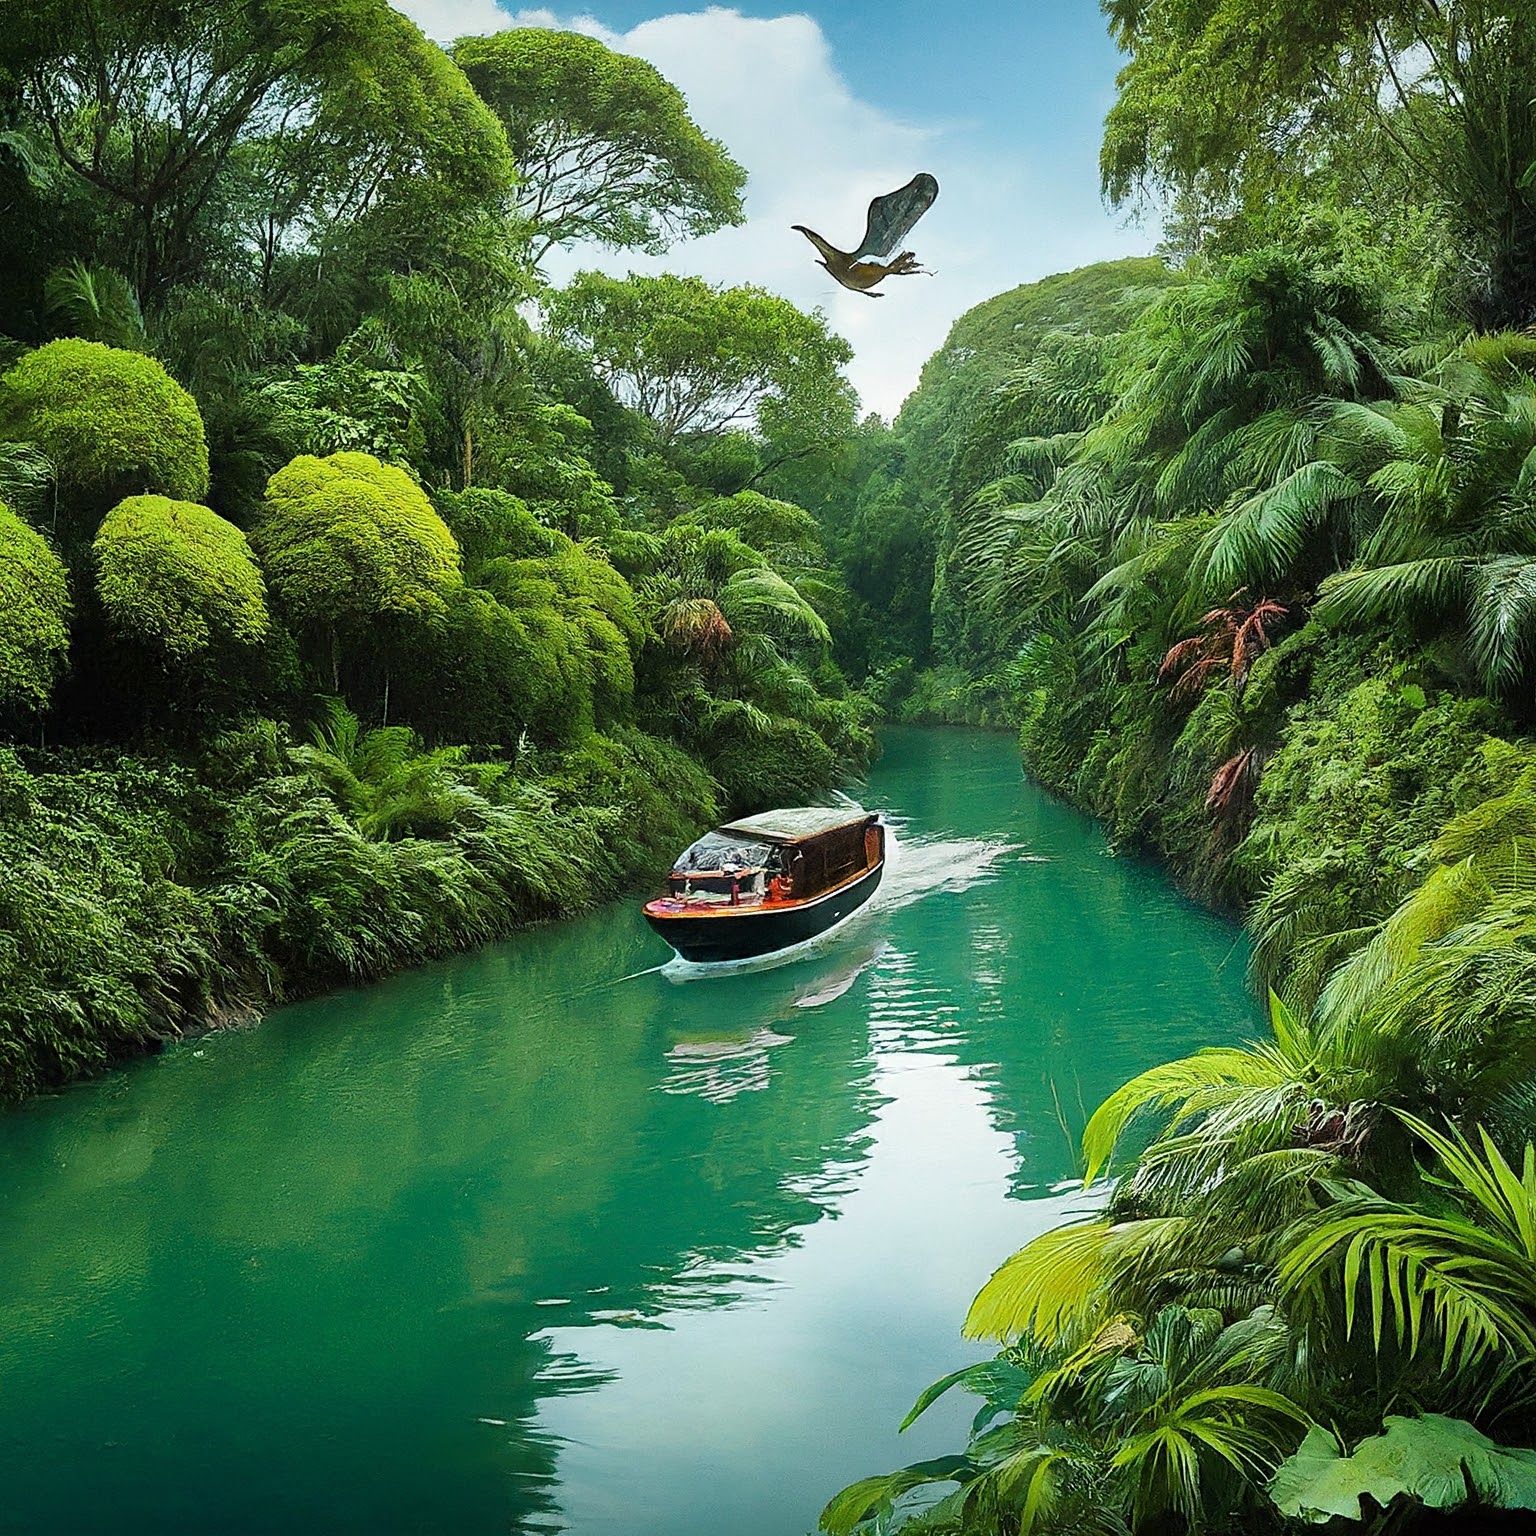 Riverboat cruise through the Singapore River Safari with rainforest and animals.